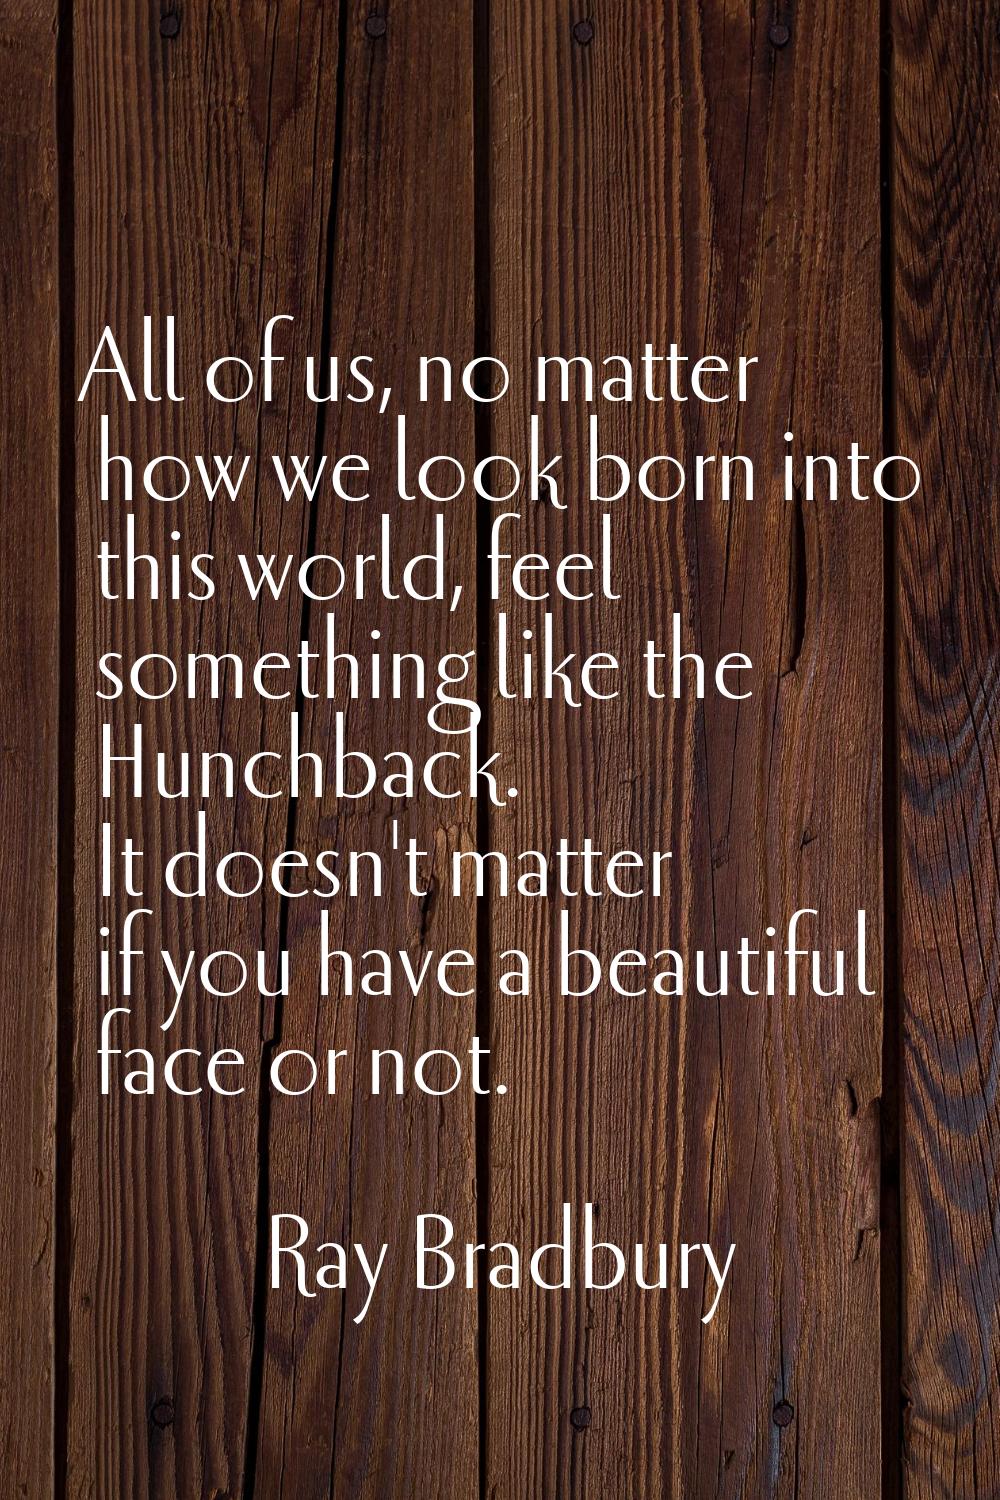 All of us, no matter how we look born into this world, feel something like the Hunchback. It doesn'